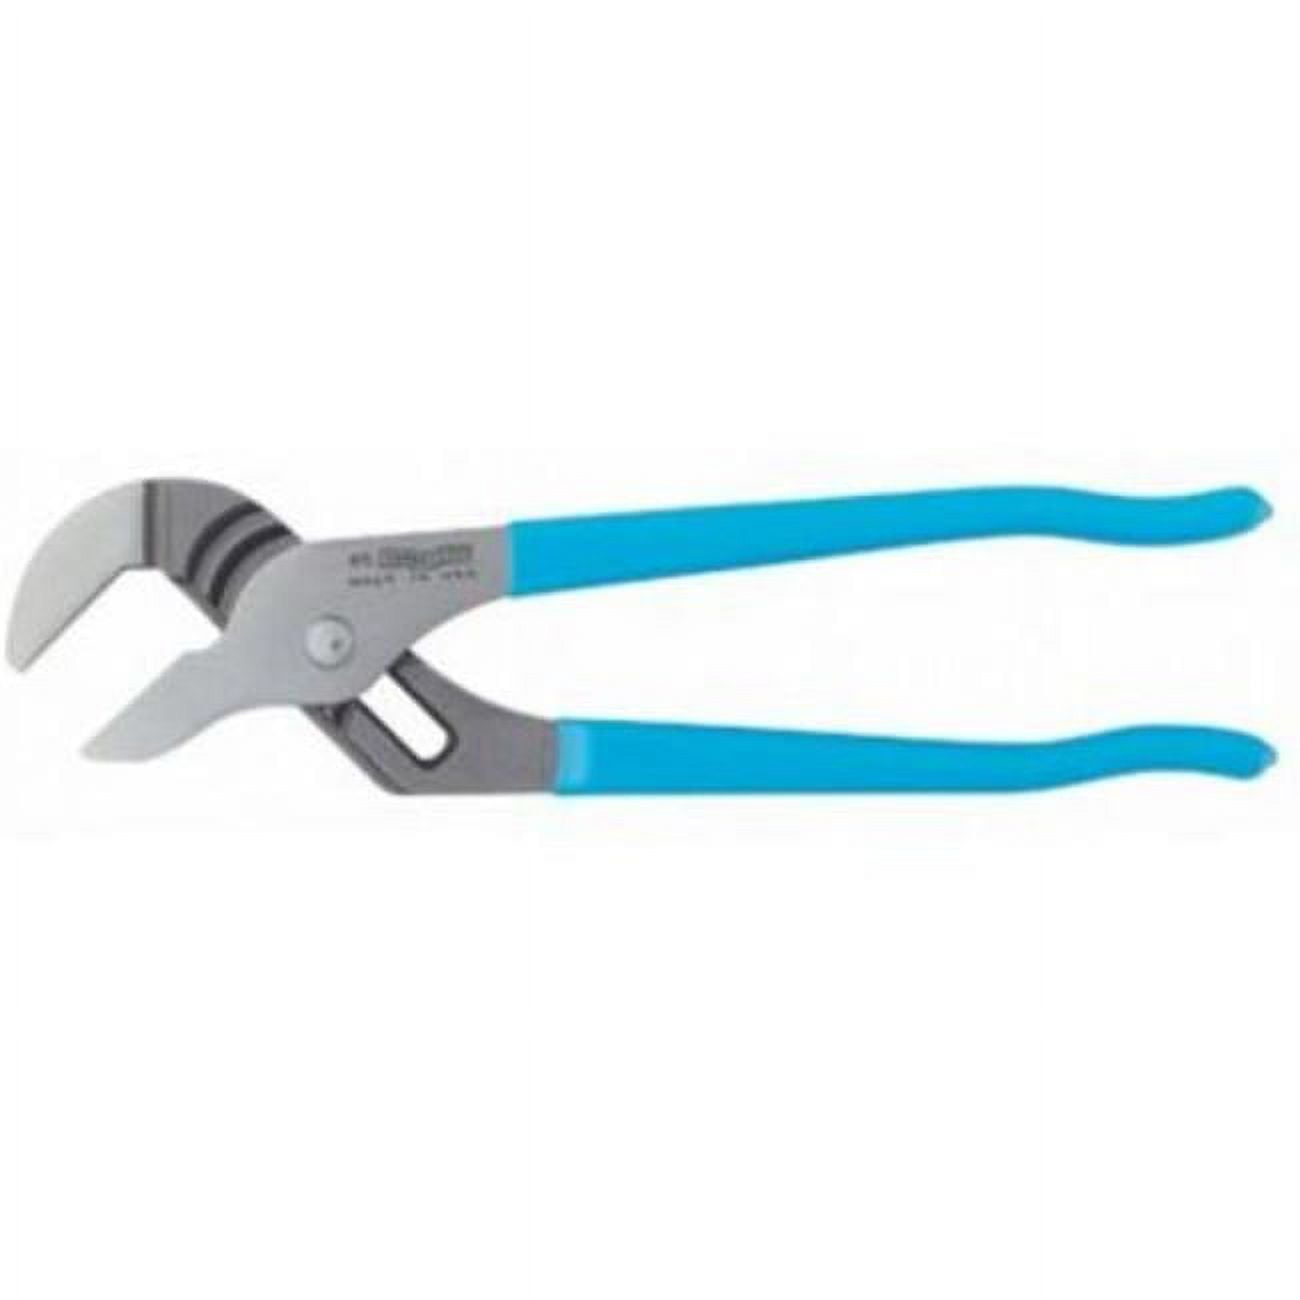 Channellock 140-440-BULK 12 in. Straight Jaw Tongue & Groove Plier, Blue